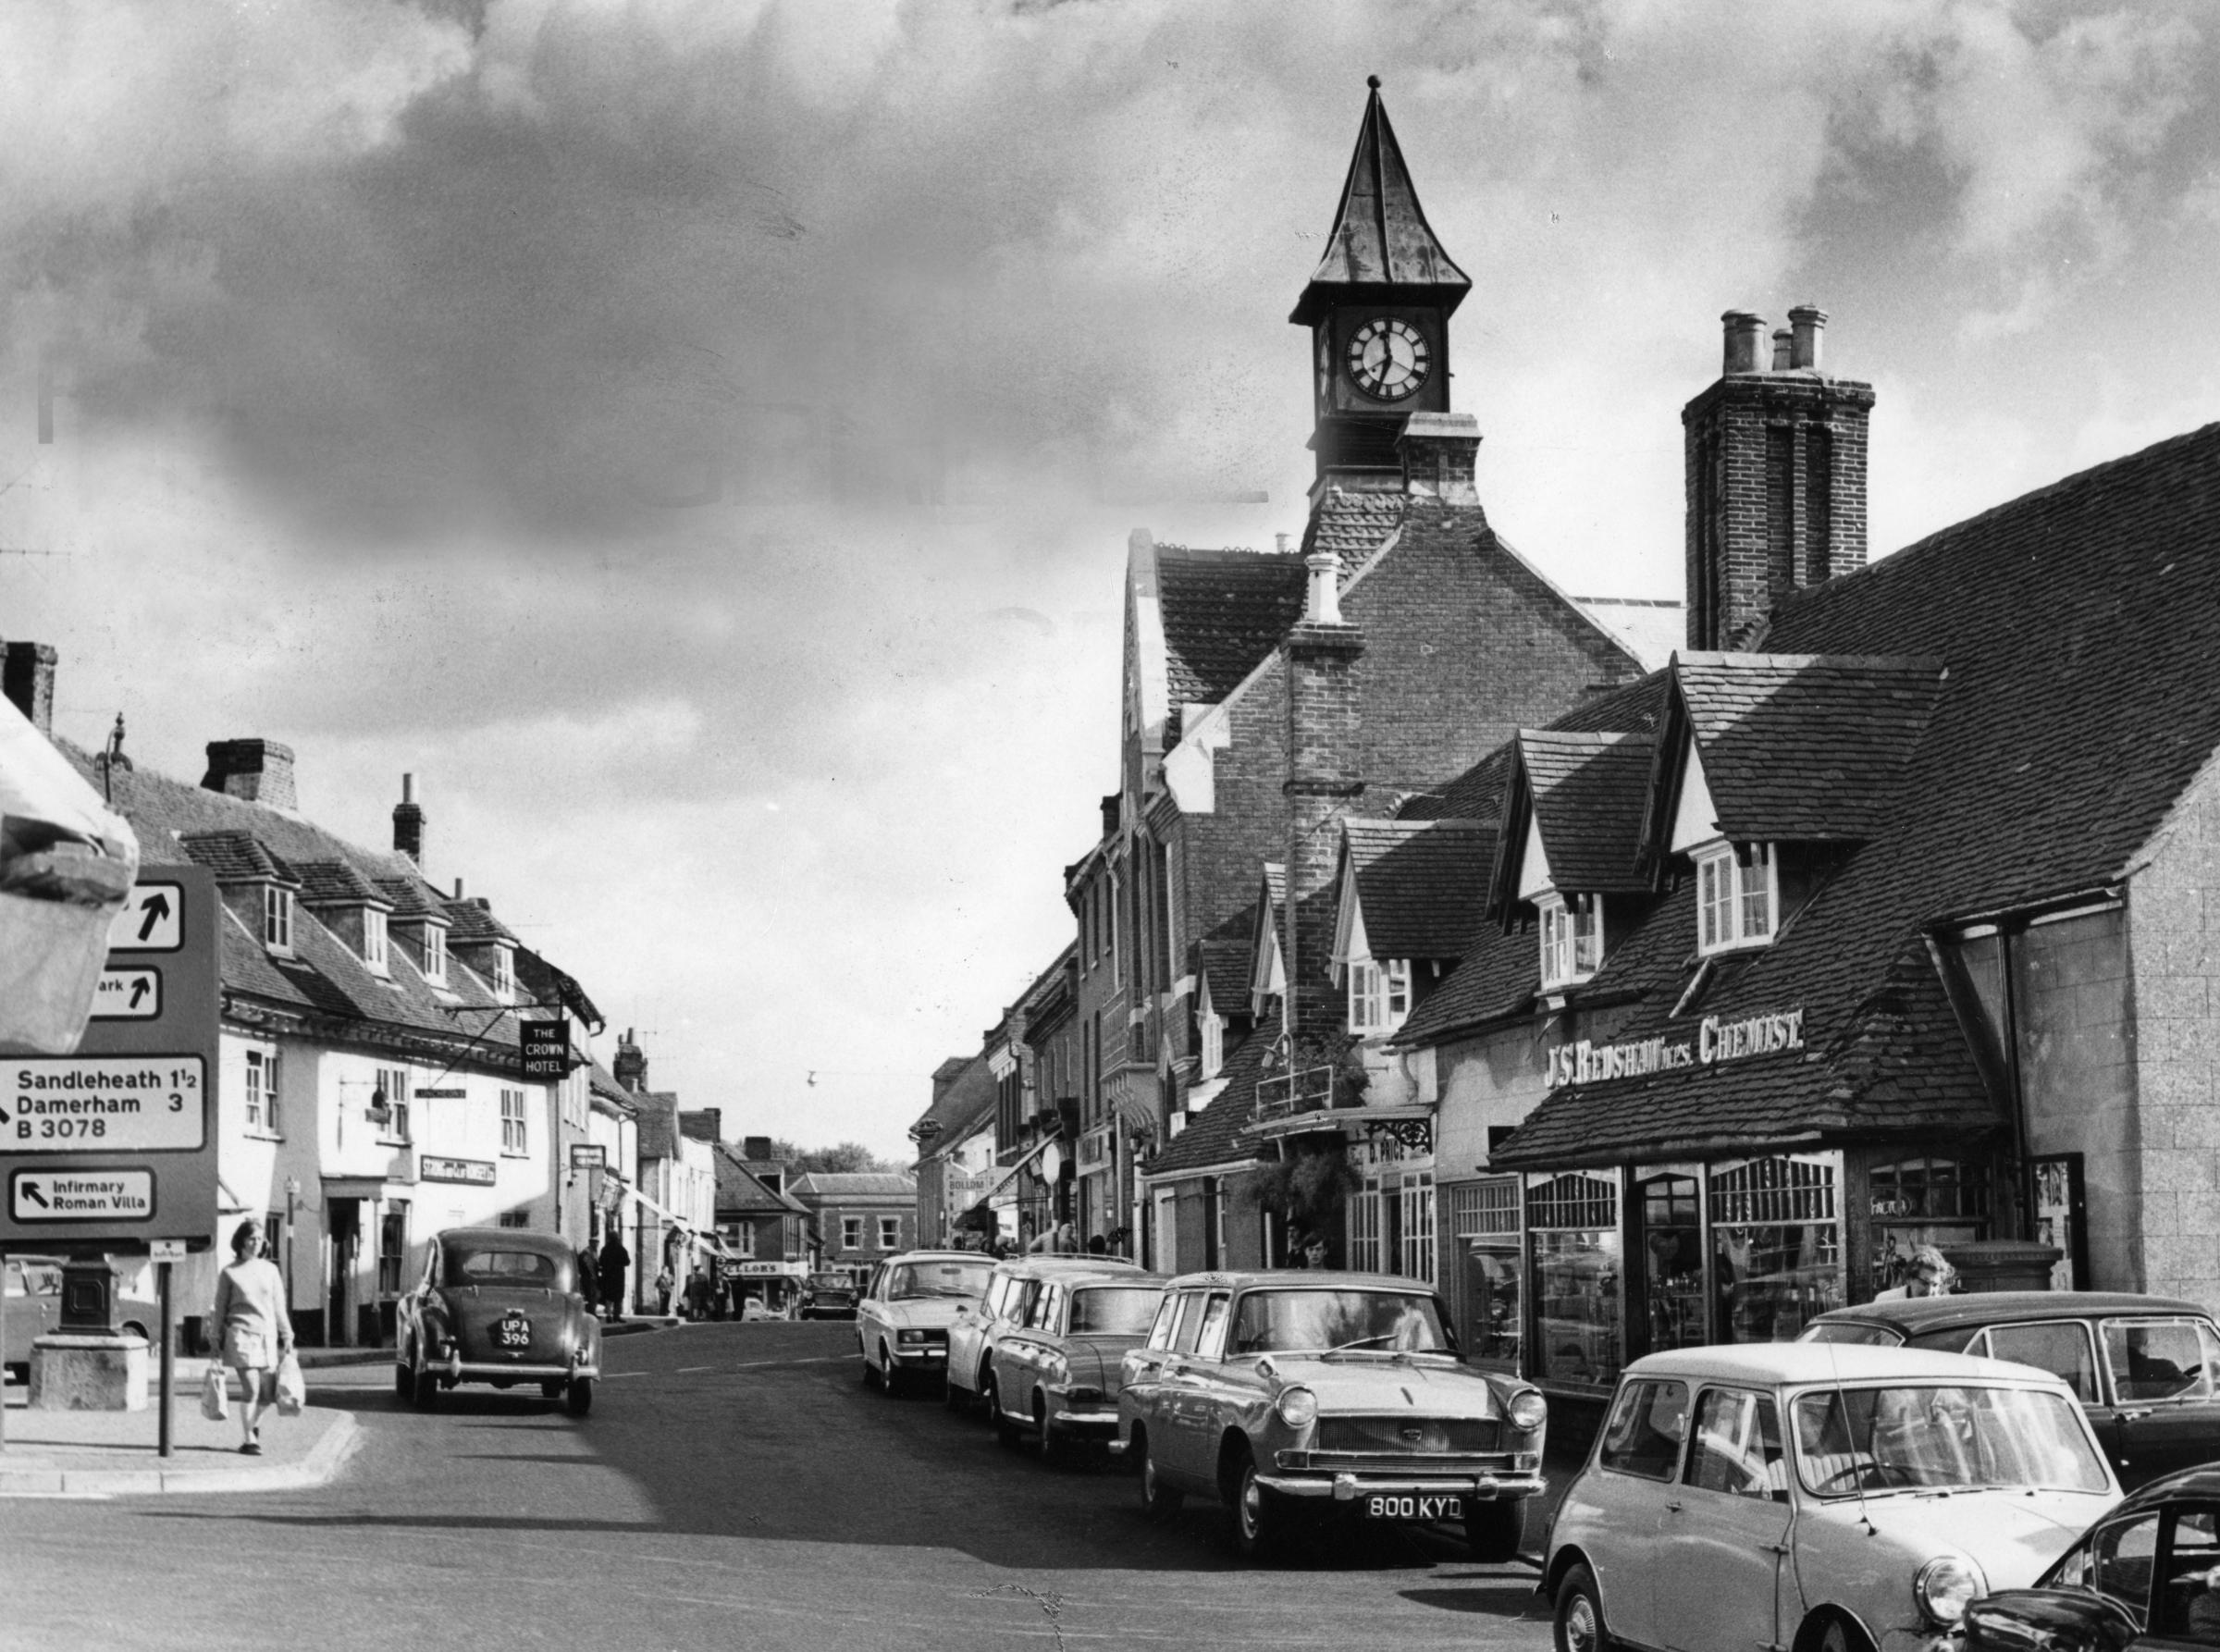 Fordingbridge - October 15, 1970. THE SOUTHERN DAILY ECHO ARCHIVES. VIEW FROM THE PAST.